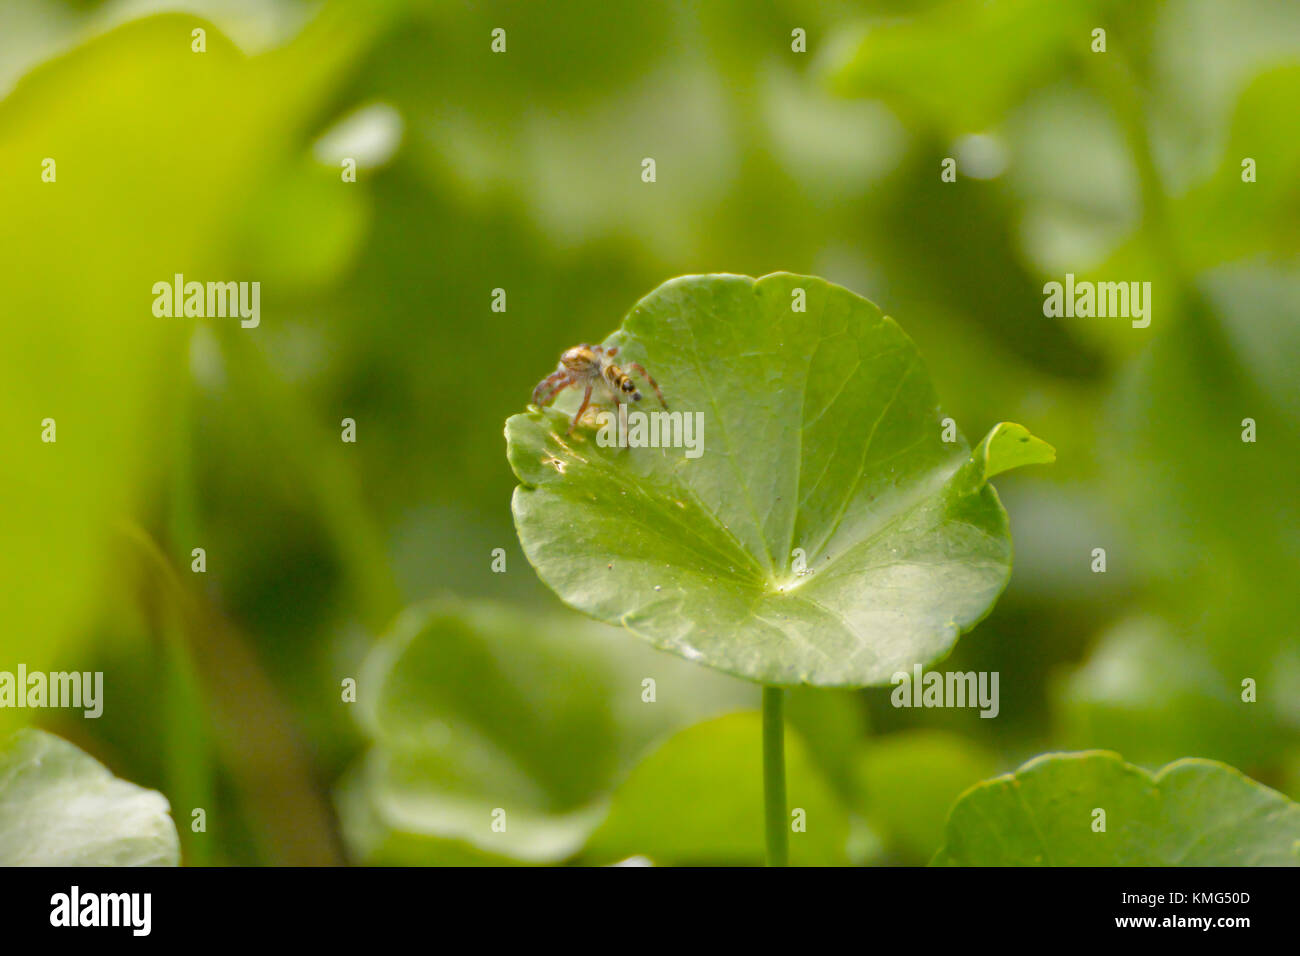 A small brown spider sitting on a water pennywort; picture taken in Chaos Sok National Park, Thailand. Stock Photo